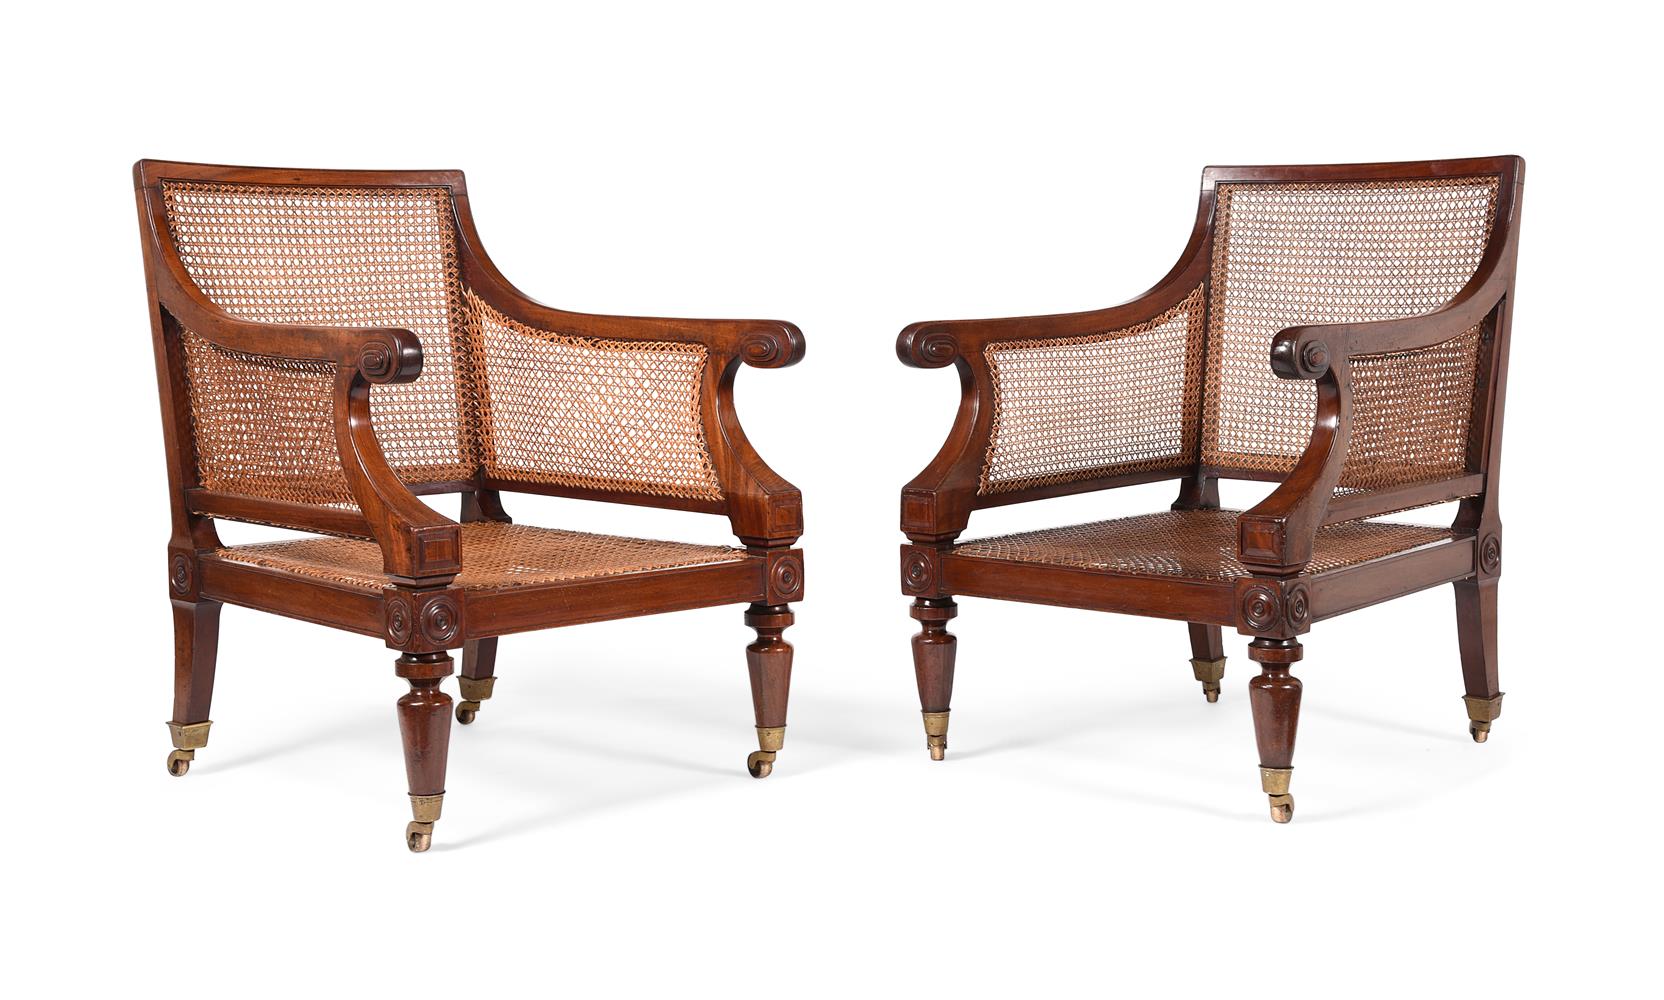 A PAIR OF REGENCY MAHOGANY BERGERE LIBRARY ARMCHAIRS, IN THE MANNER OF CHARLES HEATHCOTE TATHAM - Image 2 of 5